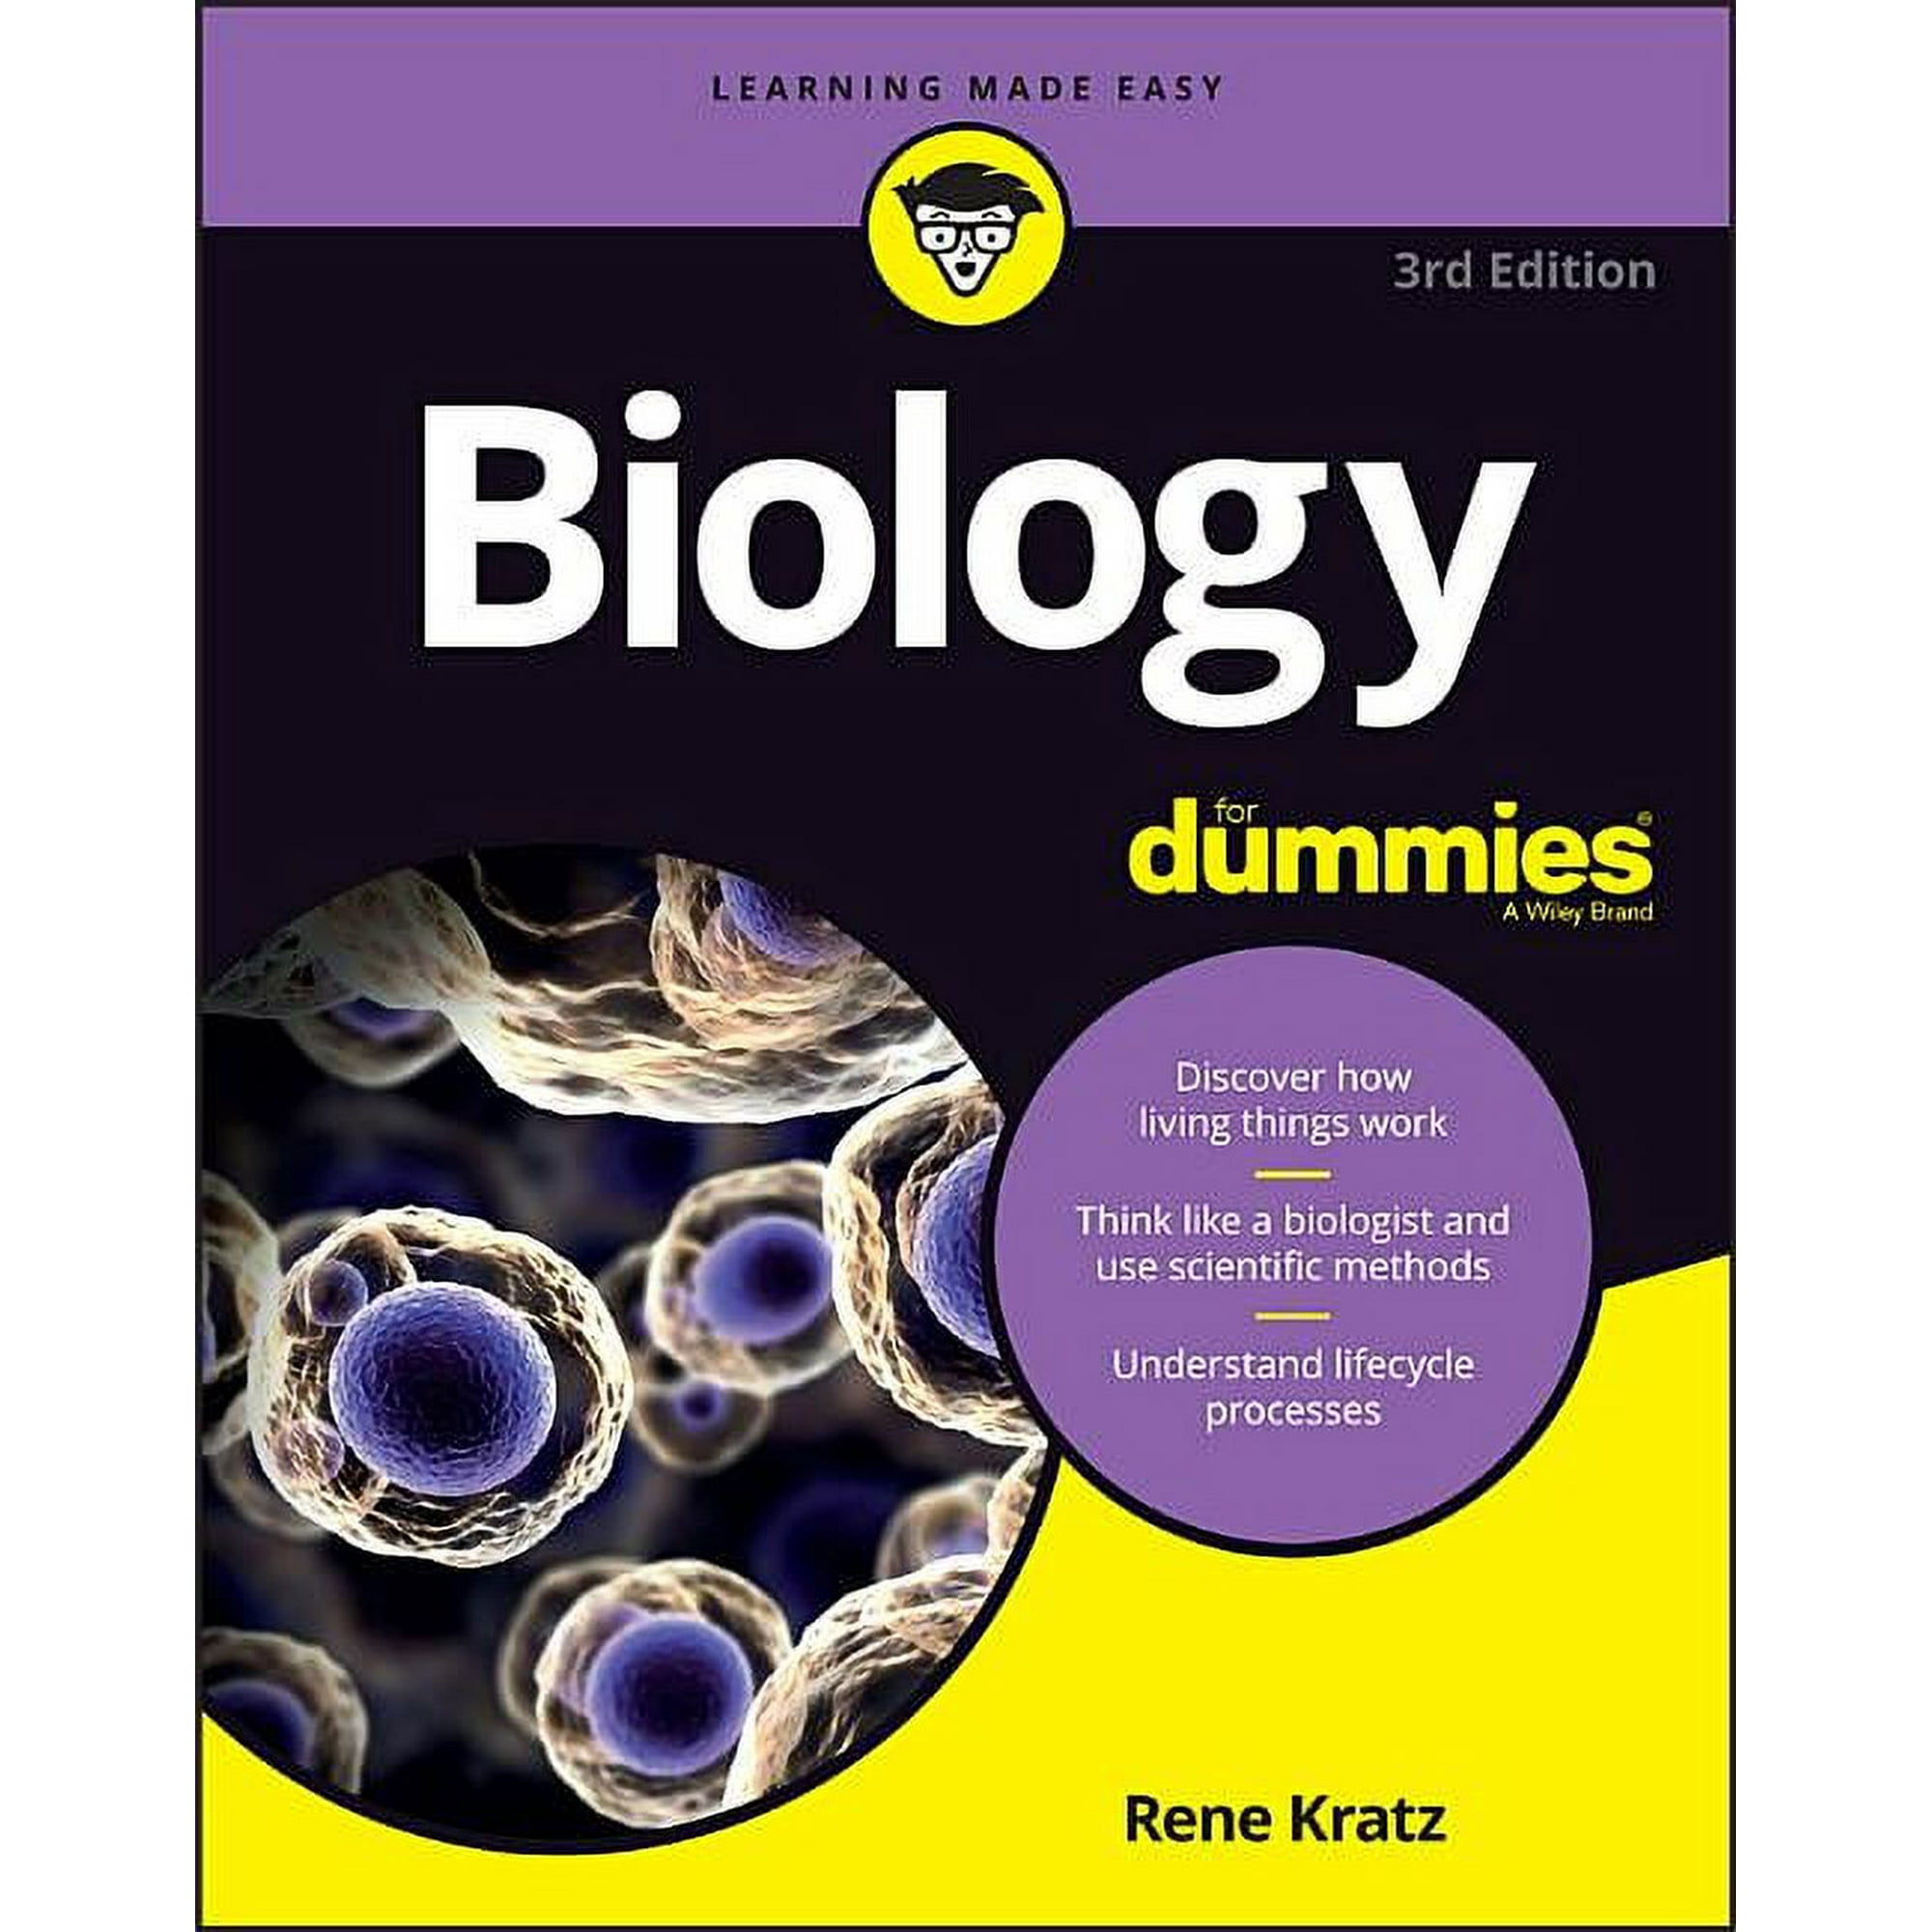 For-Dummies-Lifestyle-Biology-for-Dummies-Paperback-9781119345374_a0a56a73-fe57-4a4c-8e50-cd16688dd294.21072dfb5b8c376fad33737dda32c535.jpeg